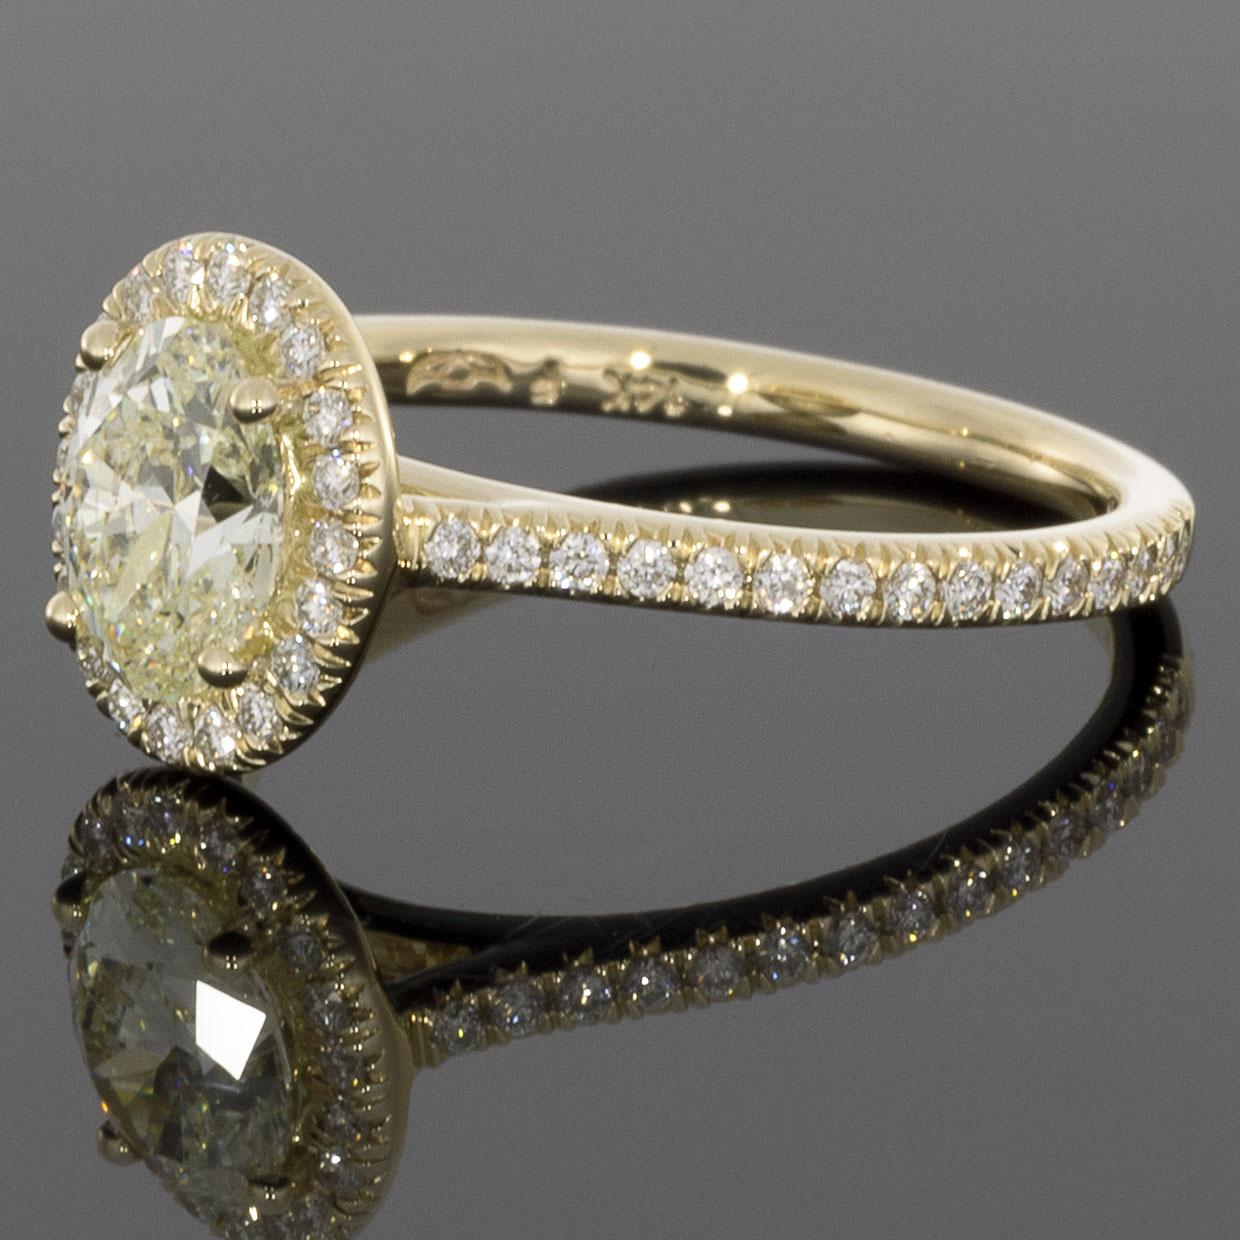 Item Details:
Estimated Retail - $6,000.00
Brand - Martin Flyer
Metal - 14 Karat Yellow Gold
Total Carat Weight (TCW) - 1.20 ctw
Certification/Grading - Yes (GIA)
Style - Halo Engagement Ring
Ring Size - 6.50
Sizable - Yes
Width - 1.80 mm

Stone 1